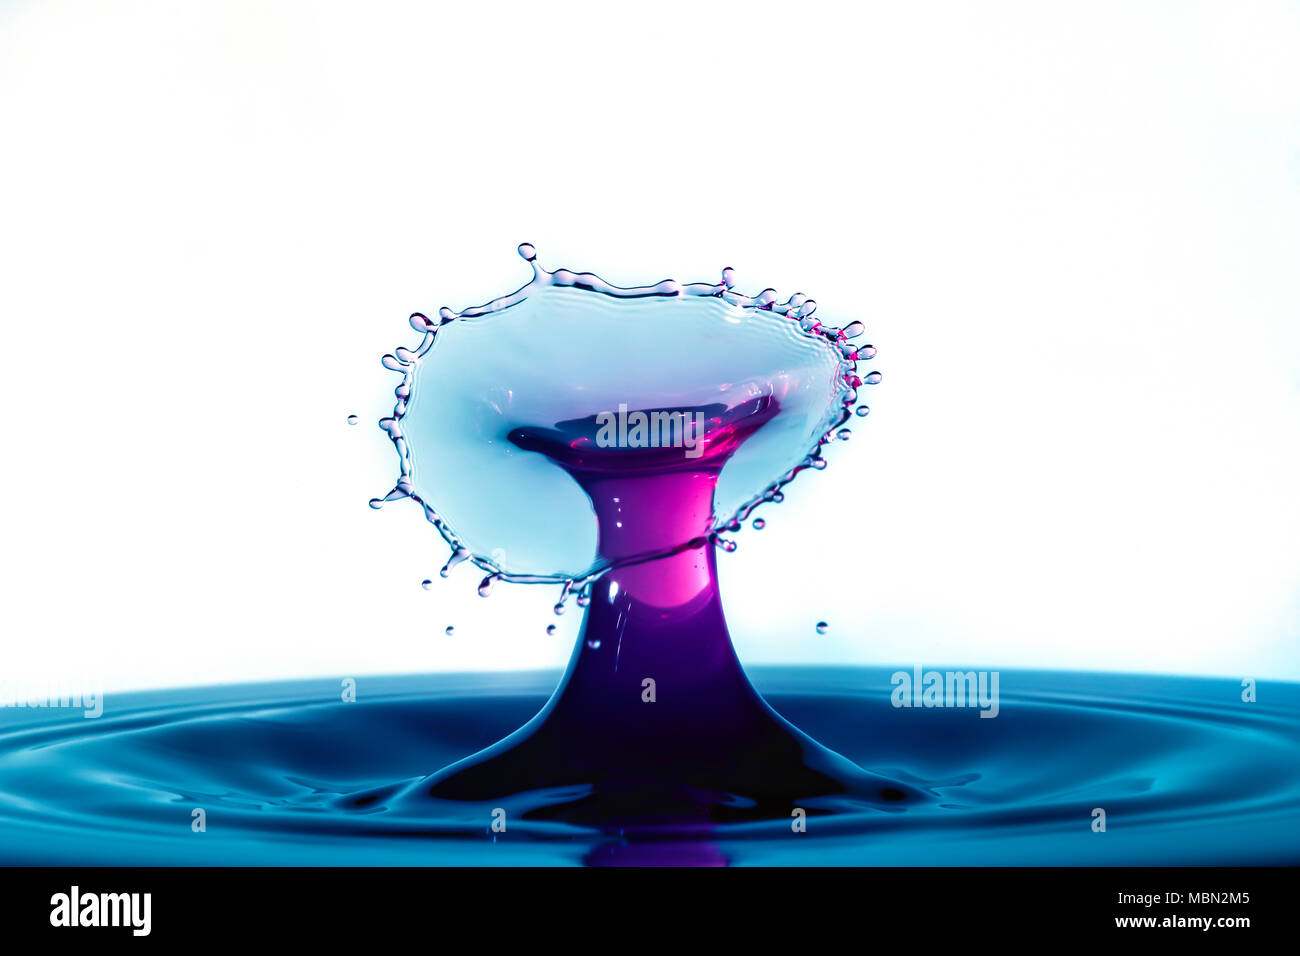 Water droplets colliding macro blue and mauve Stock Photo